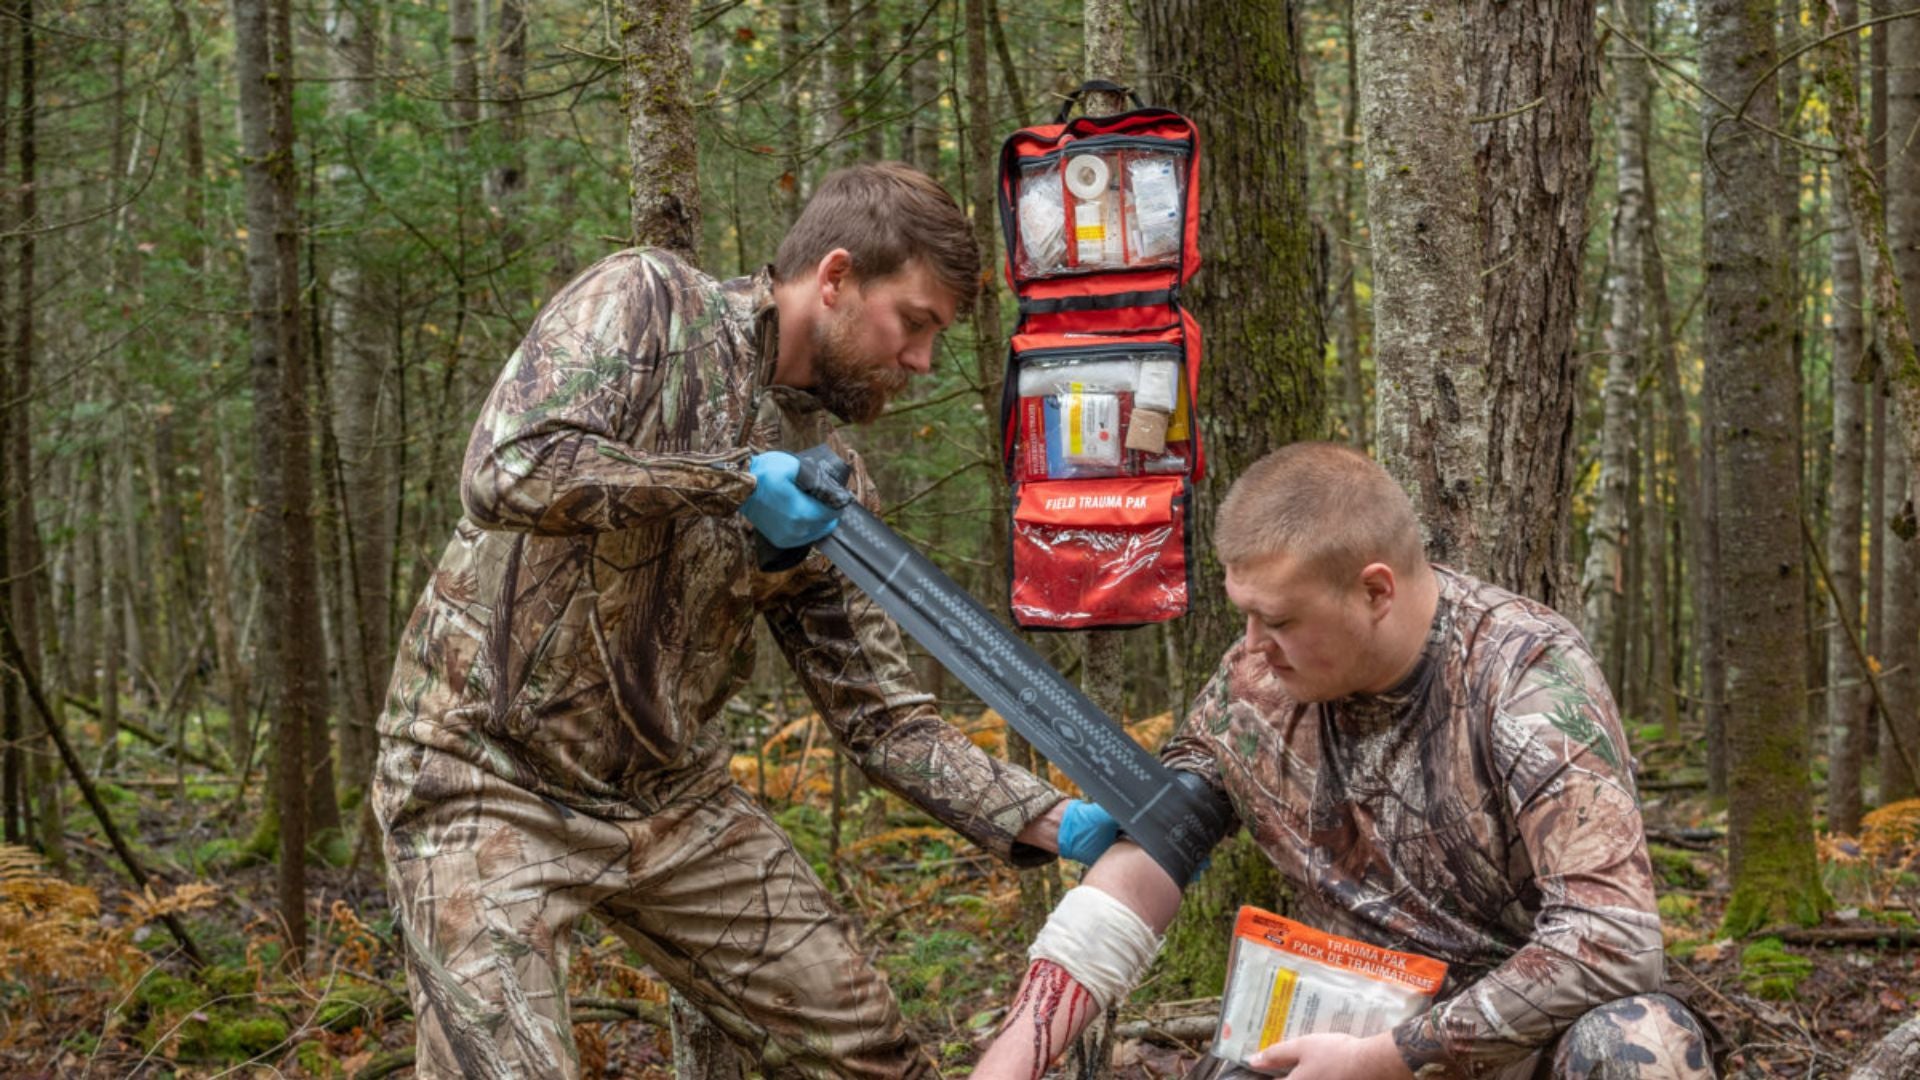 Deer Hunting Safety: Why It’s Essential to be Educated & Prepared